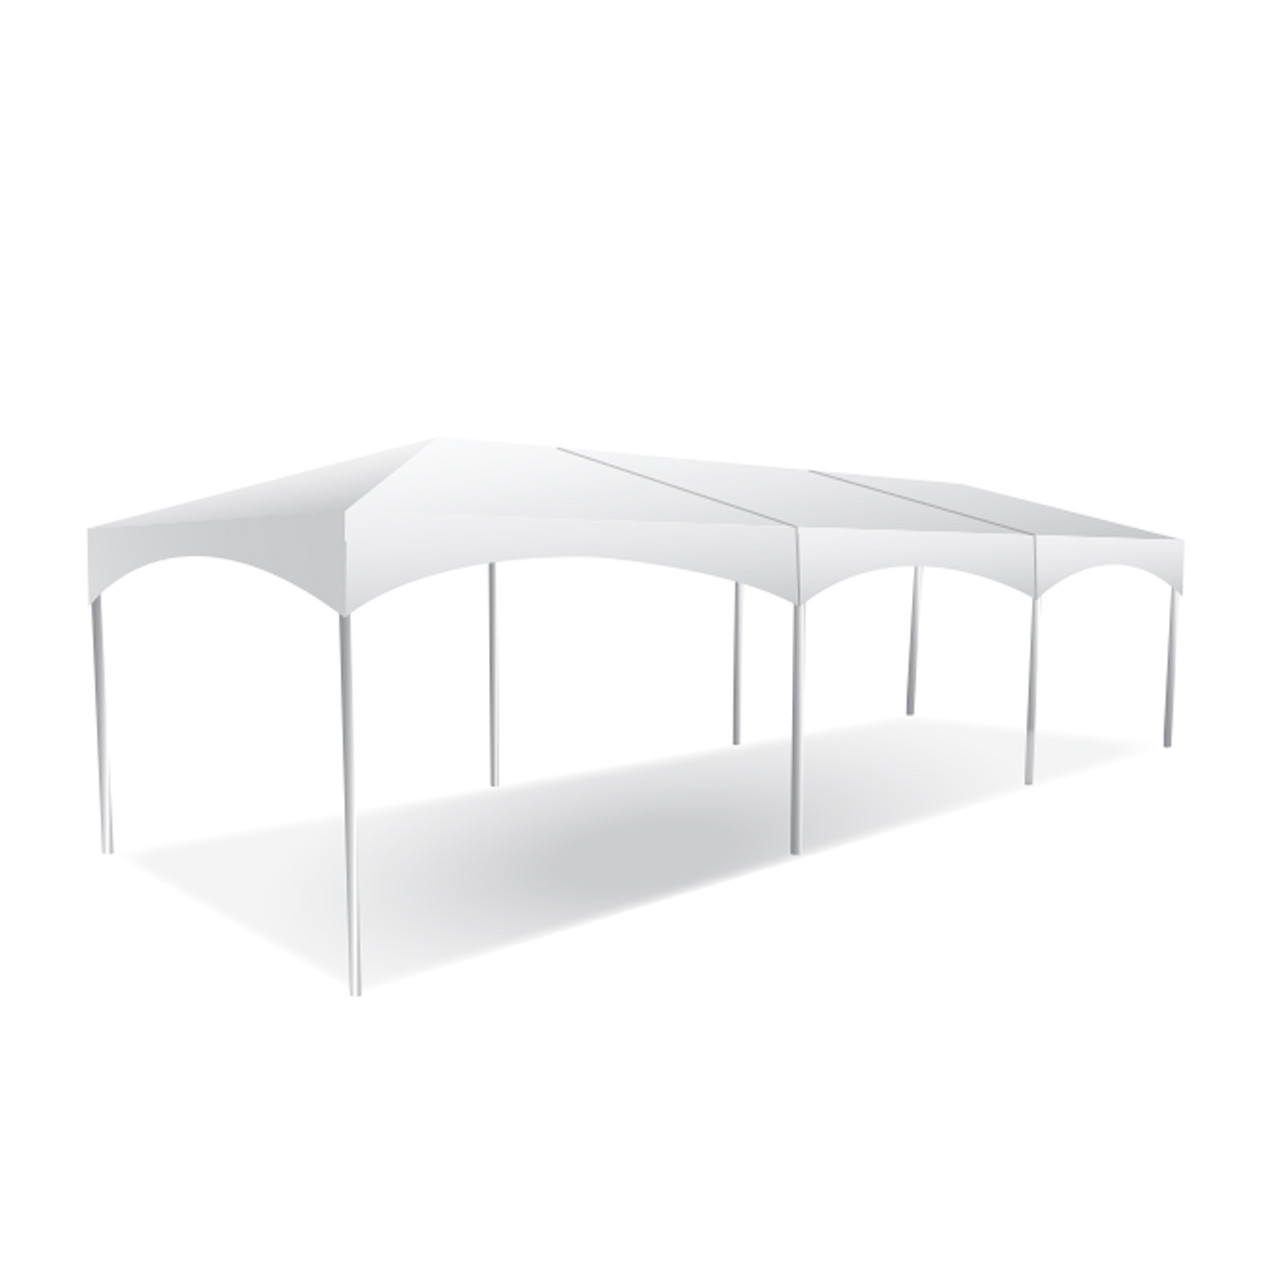 10' x 30' Master Series Frame Tent, Sectional Tent Top, Complete